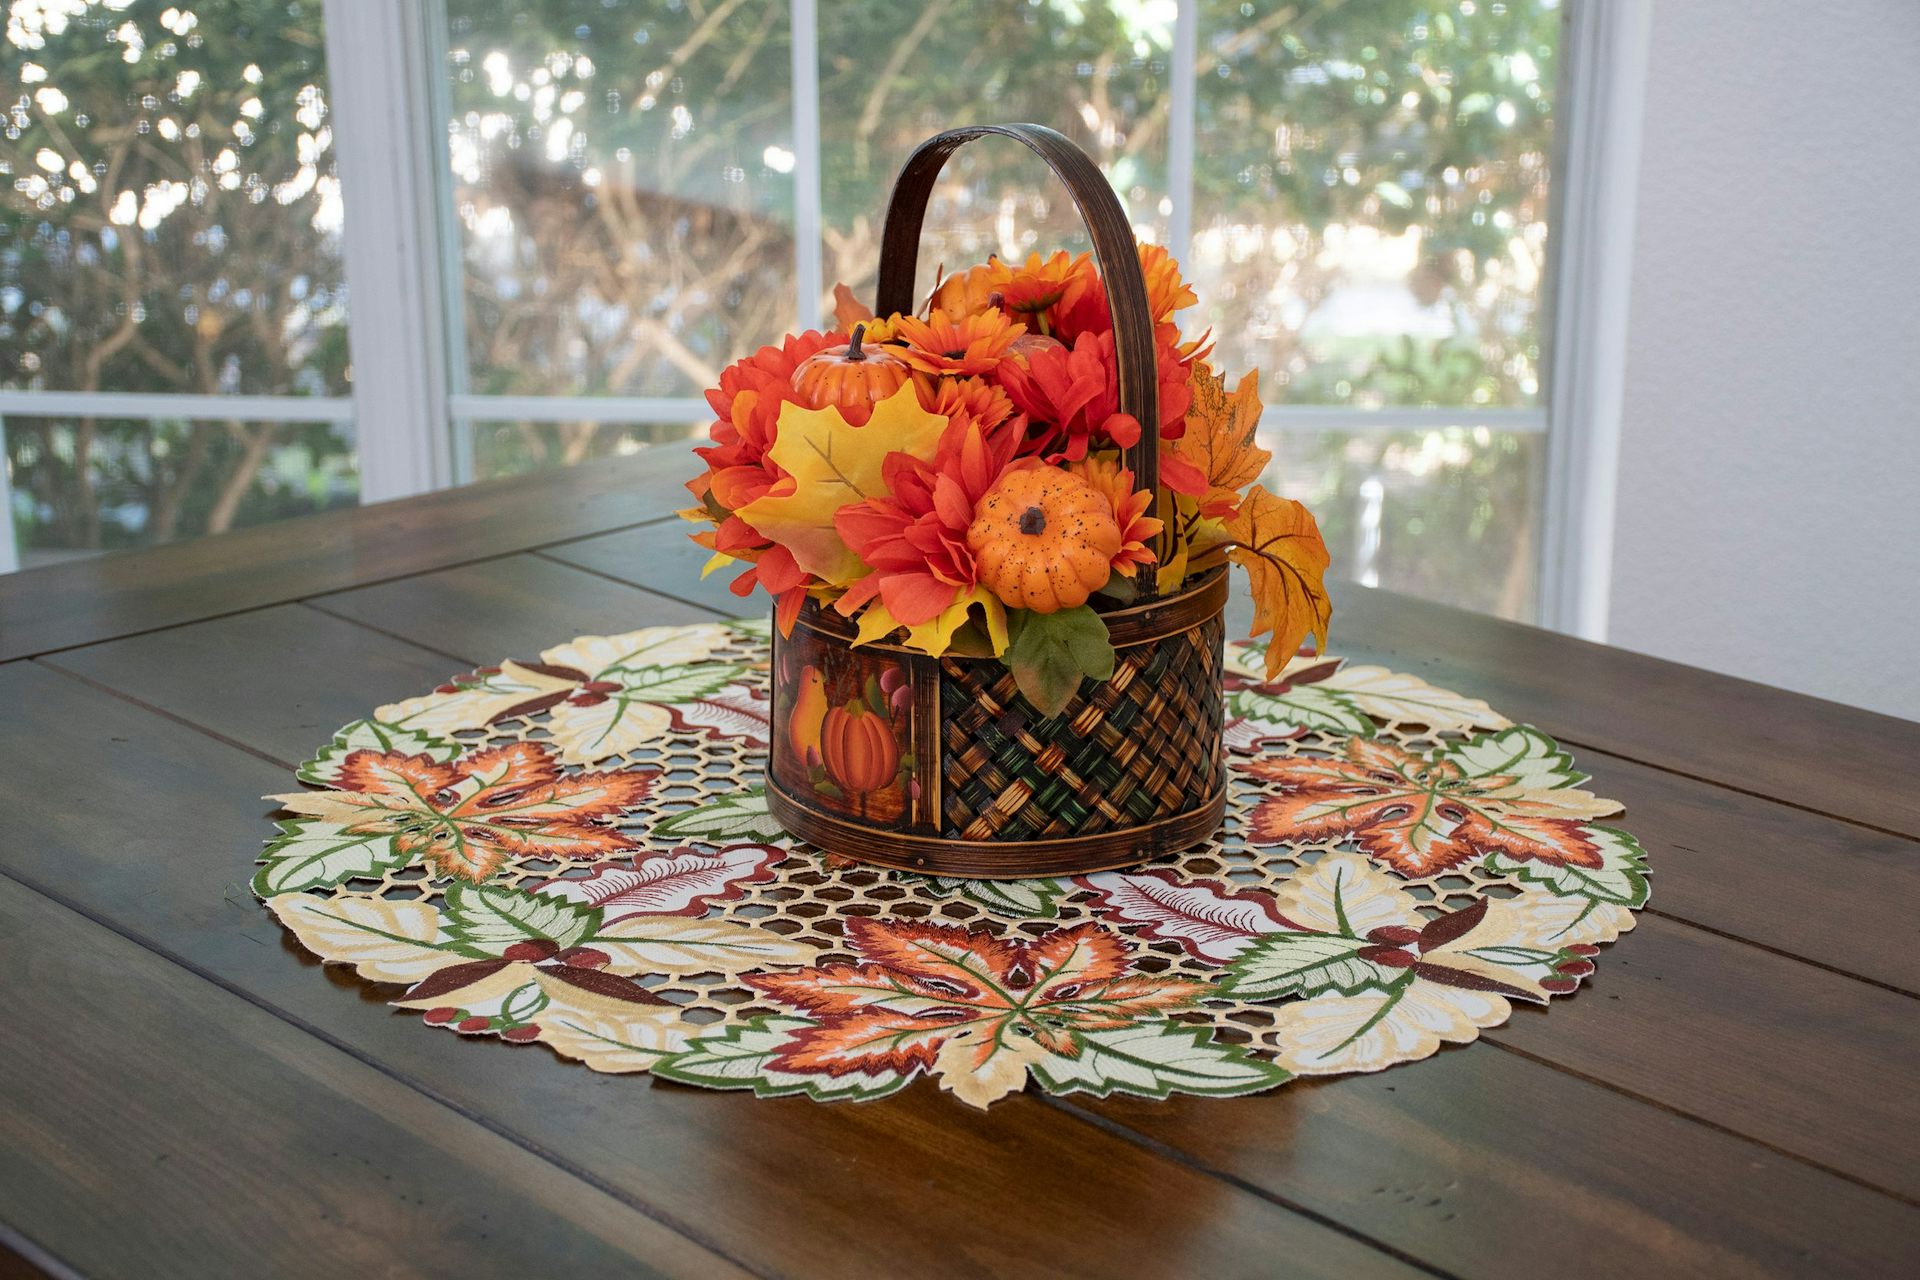 Colorful Fall Maple Leaf Table Doily (23,33" RD 23,33" SQ)